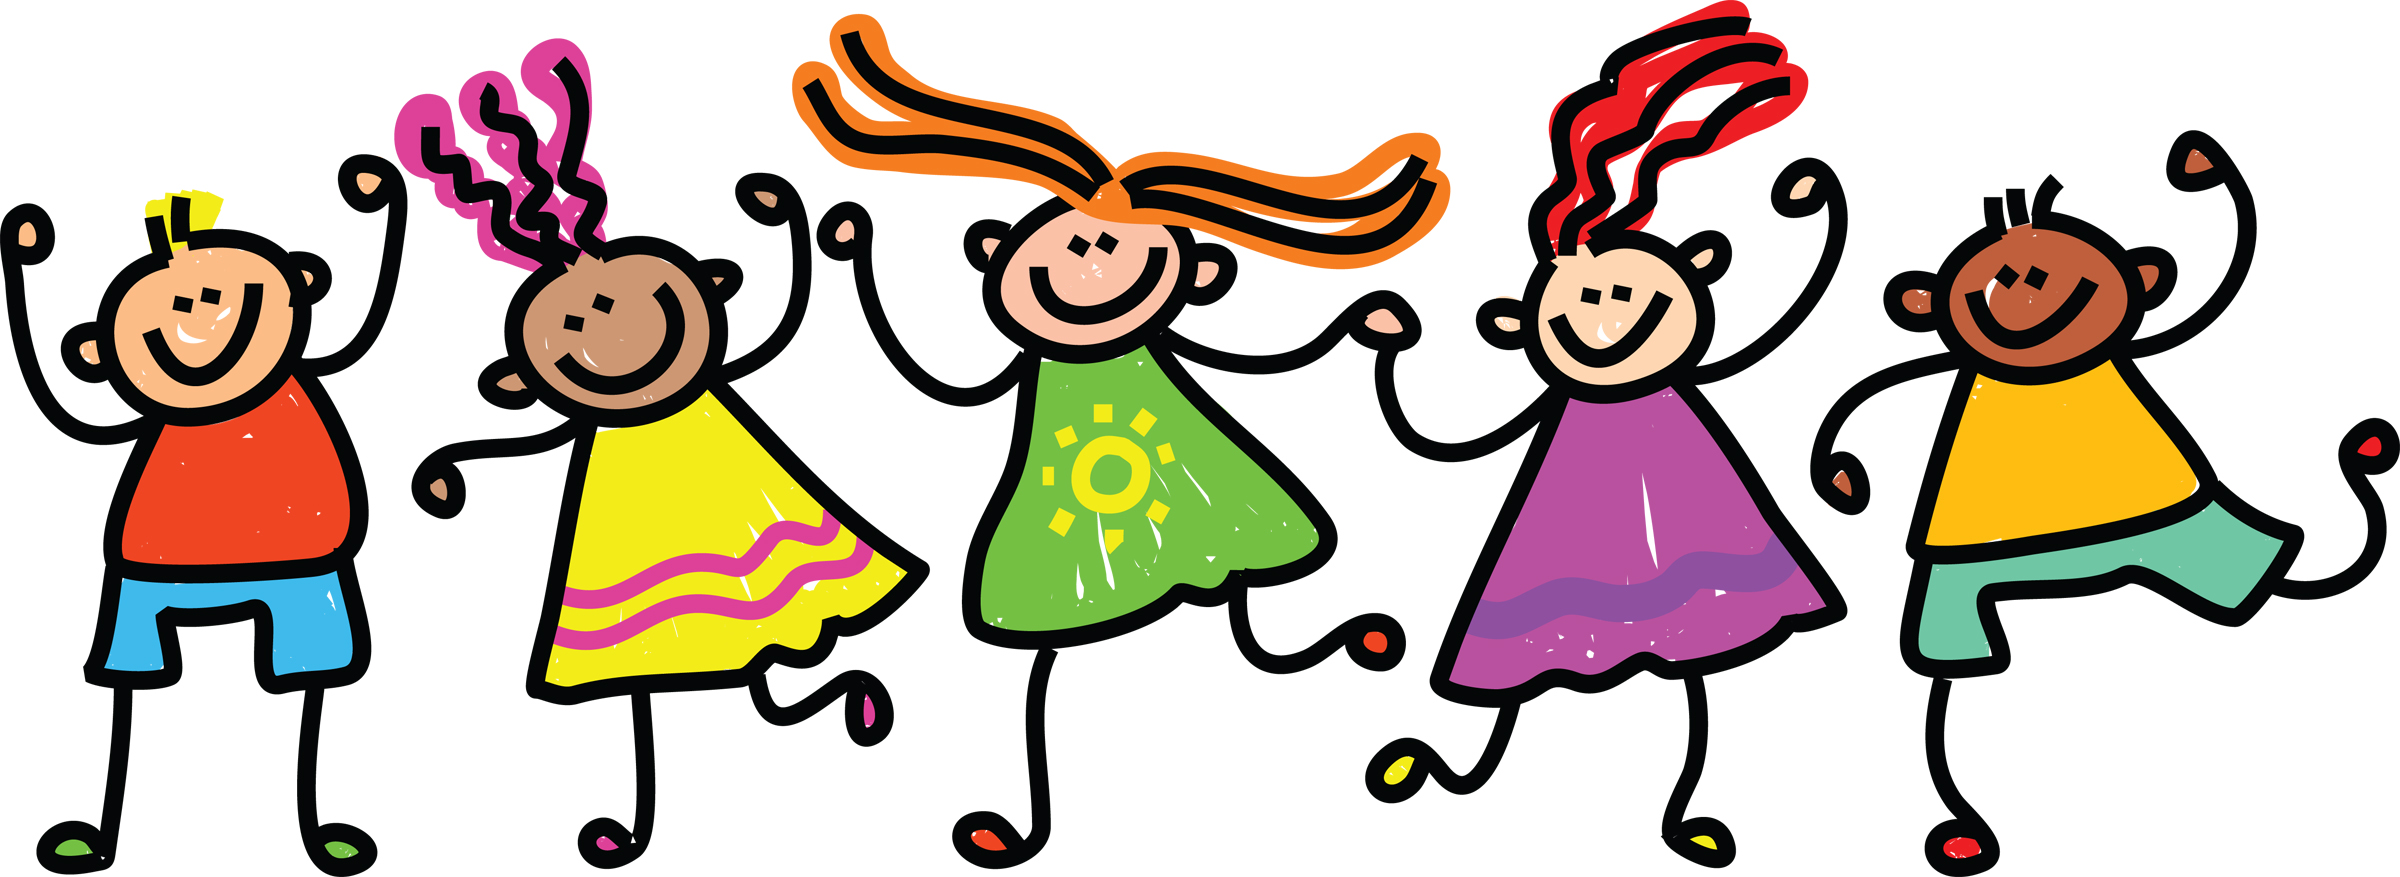 Picture Of Children Holding Hands - ClipArt Best